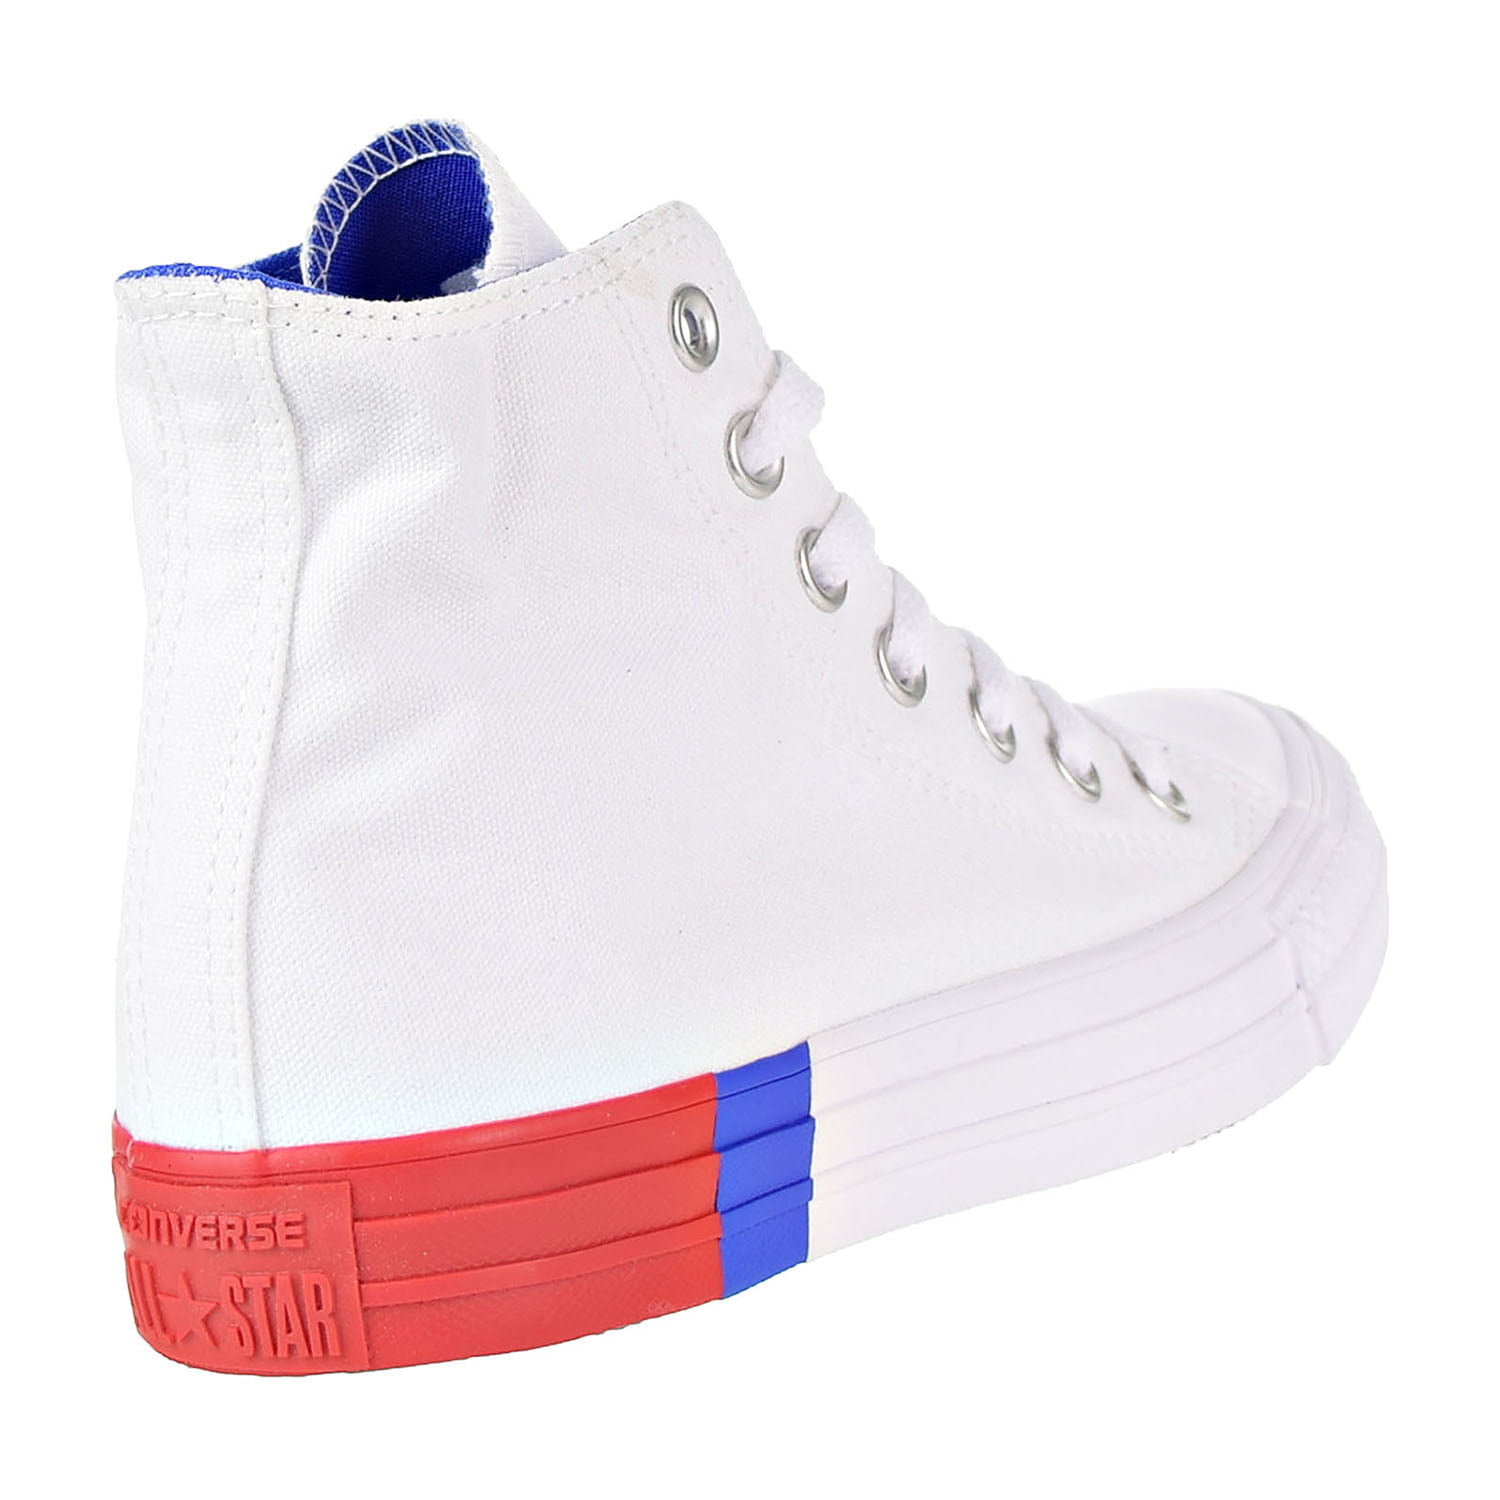 Converse Chuck Taylor All Star Hi Unisex Shoes White/Red/Blue 159639f -  